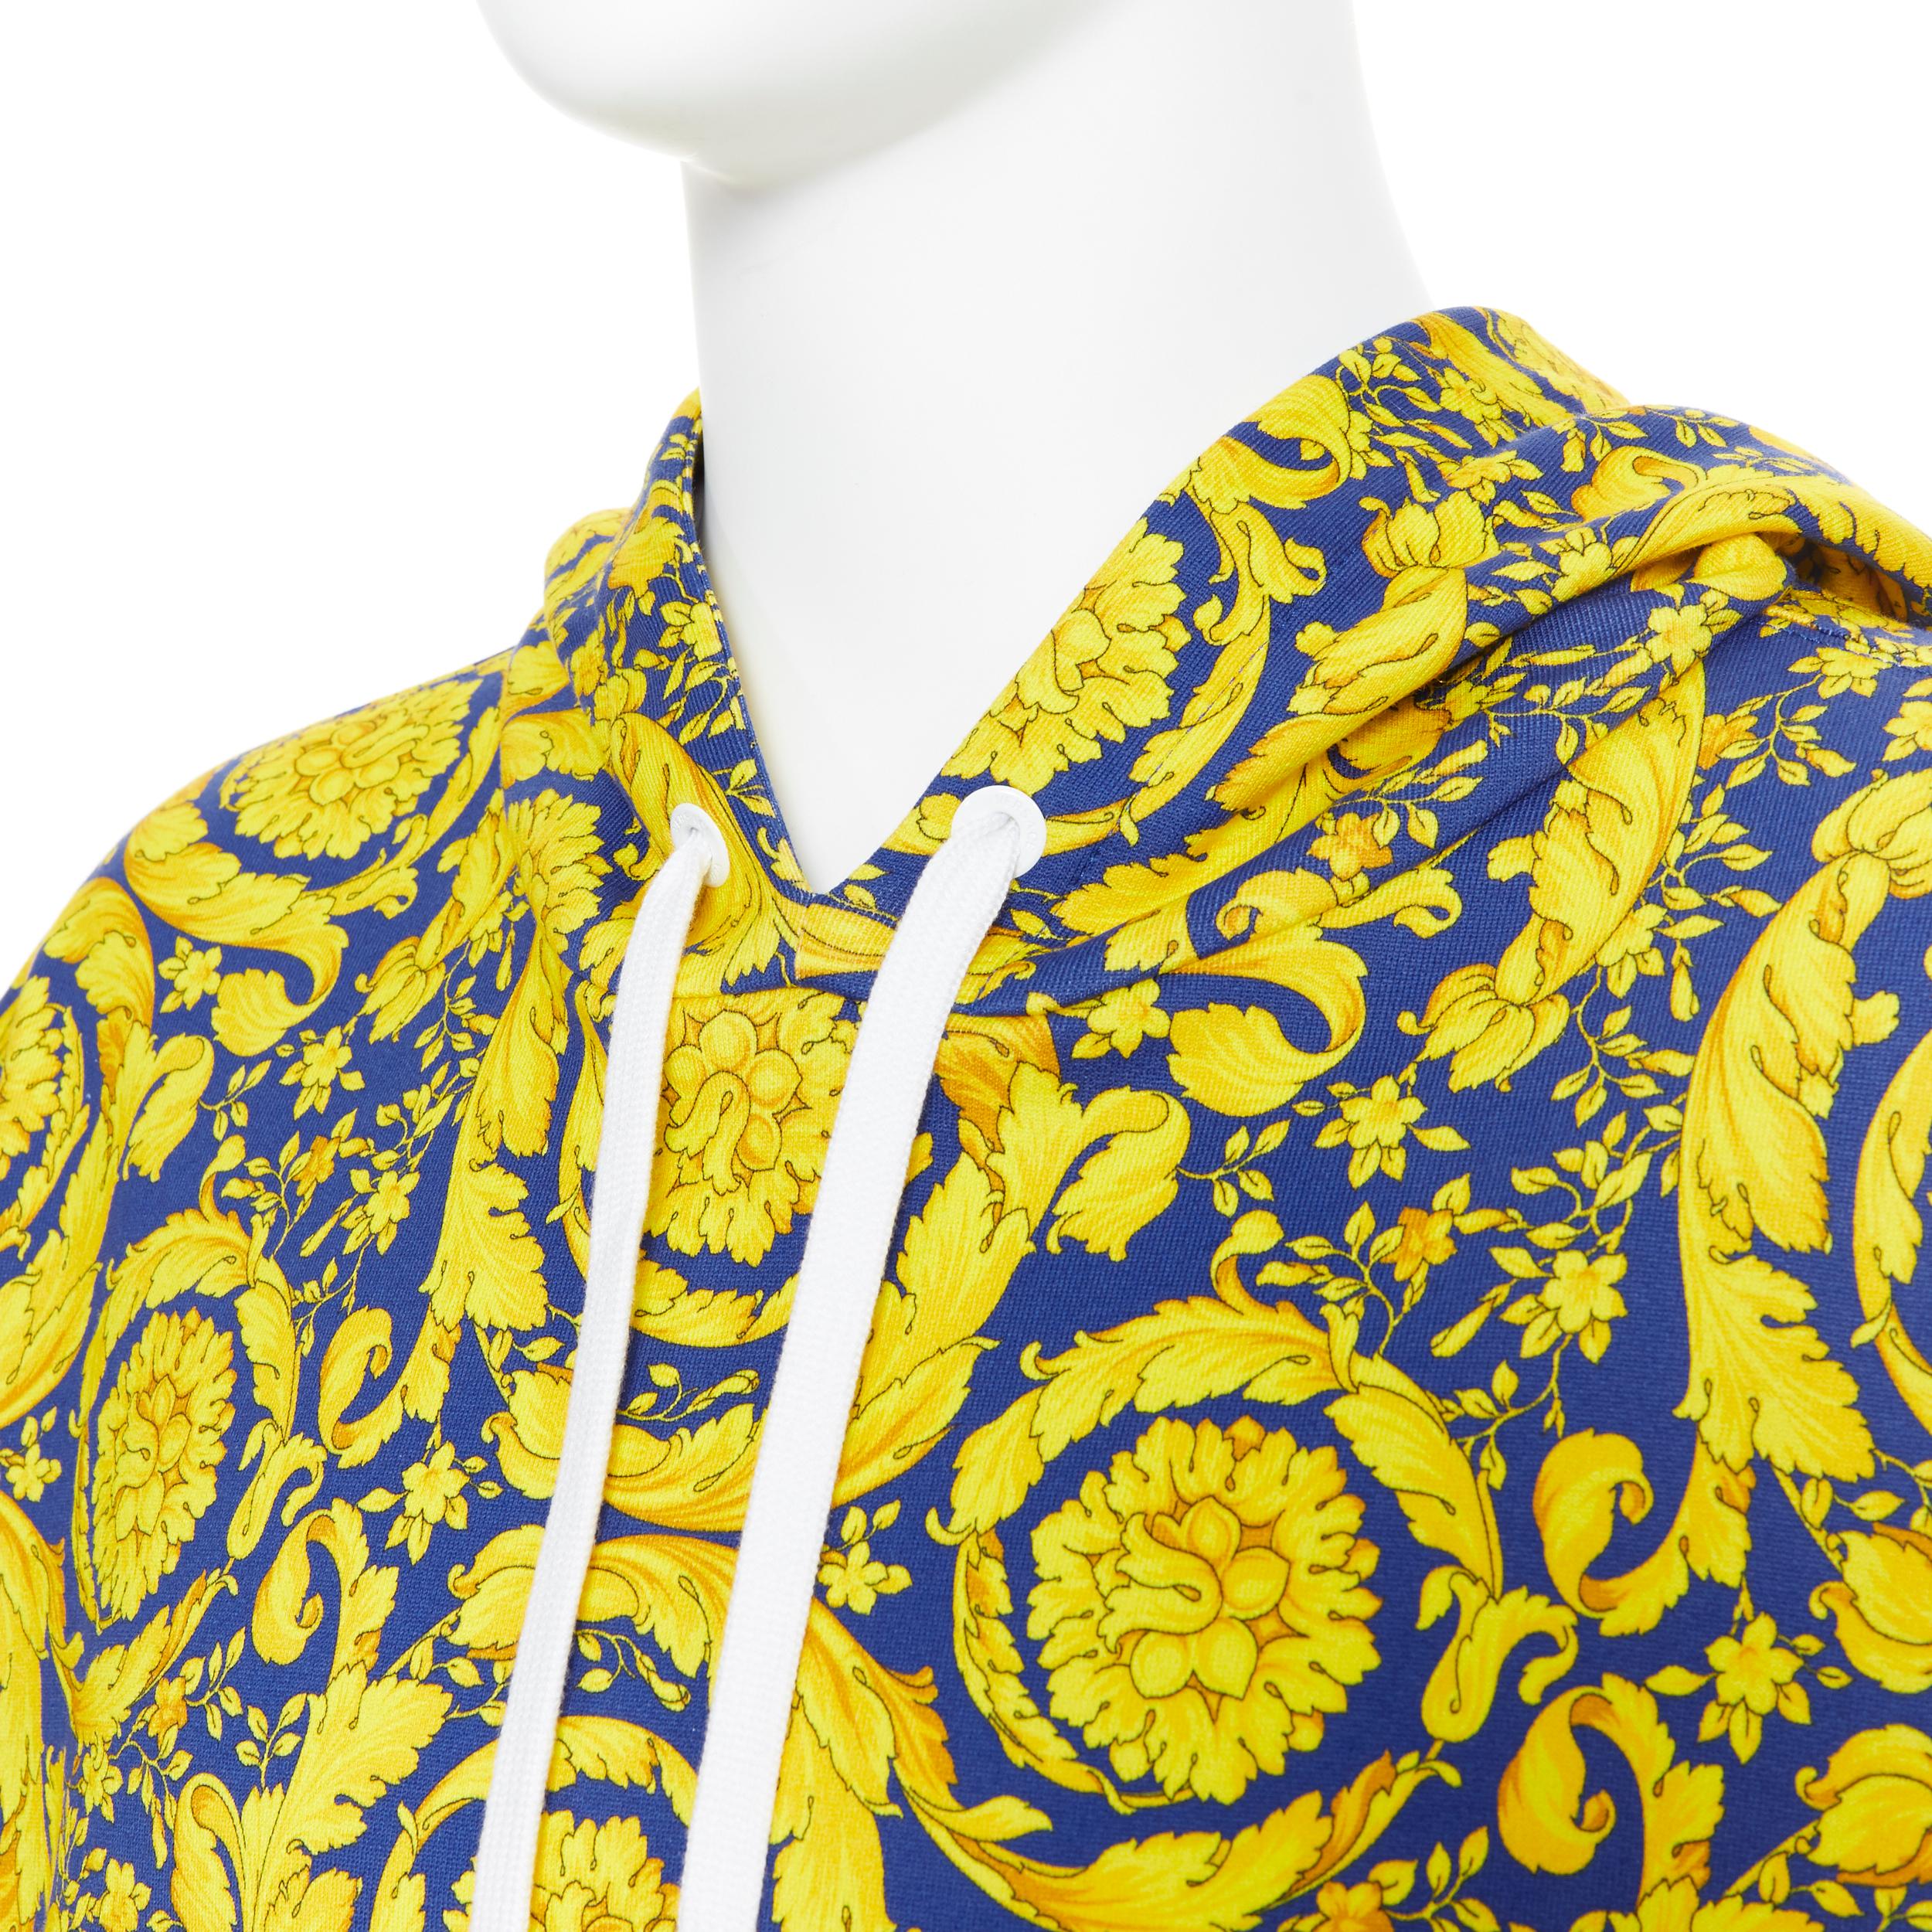 new VERSACE royal blue gold floral baroque print 100% cotton hoodie sweater 3XL
Brand: Versace
Designer: Donatella Versace
Model Name / Style: Baroque hoodie
Material: Cotton
Color: Gold
Pattern: Floral
Extra Detail: Long sleeve.
Made in: